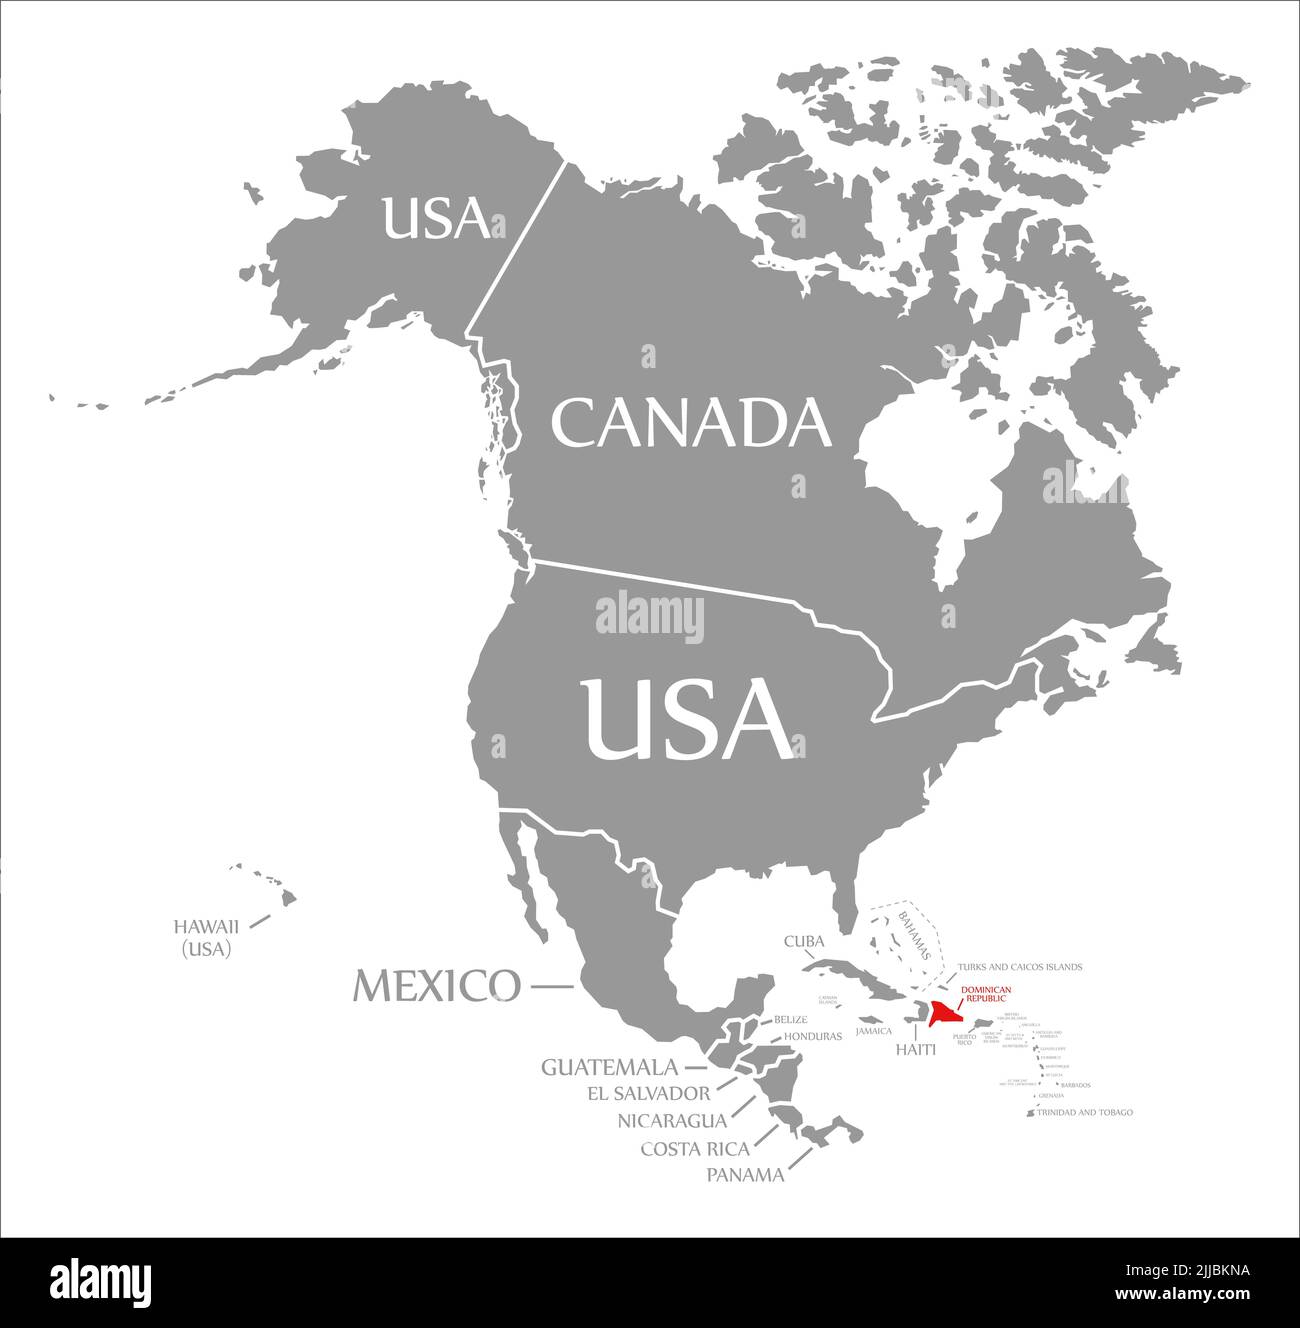 Dominican Republic red highlighted in map of North America Stock Photo